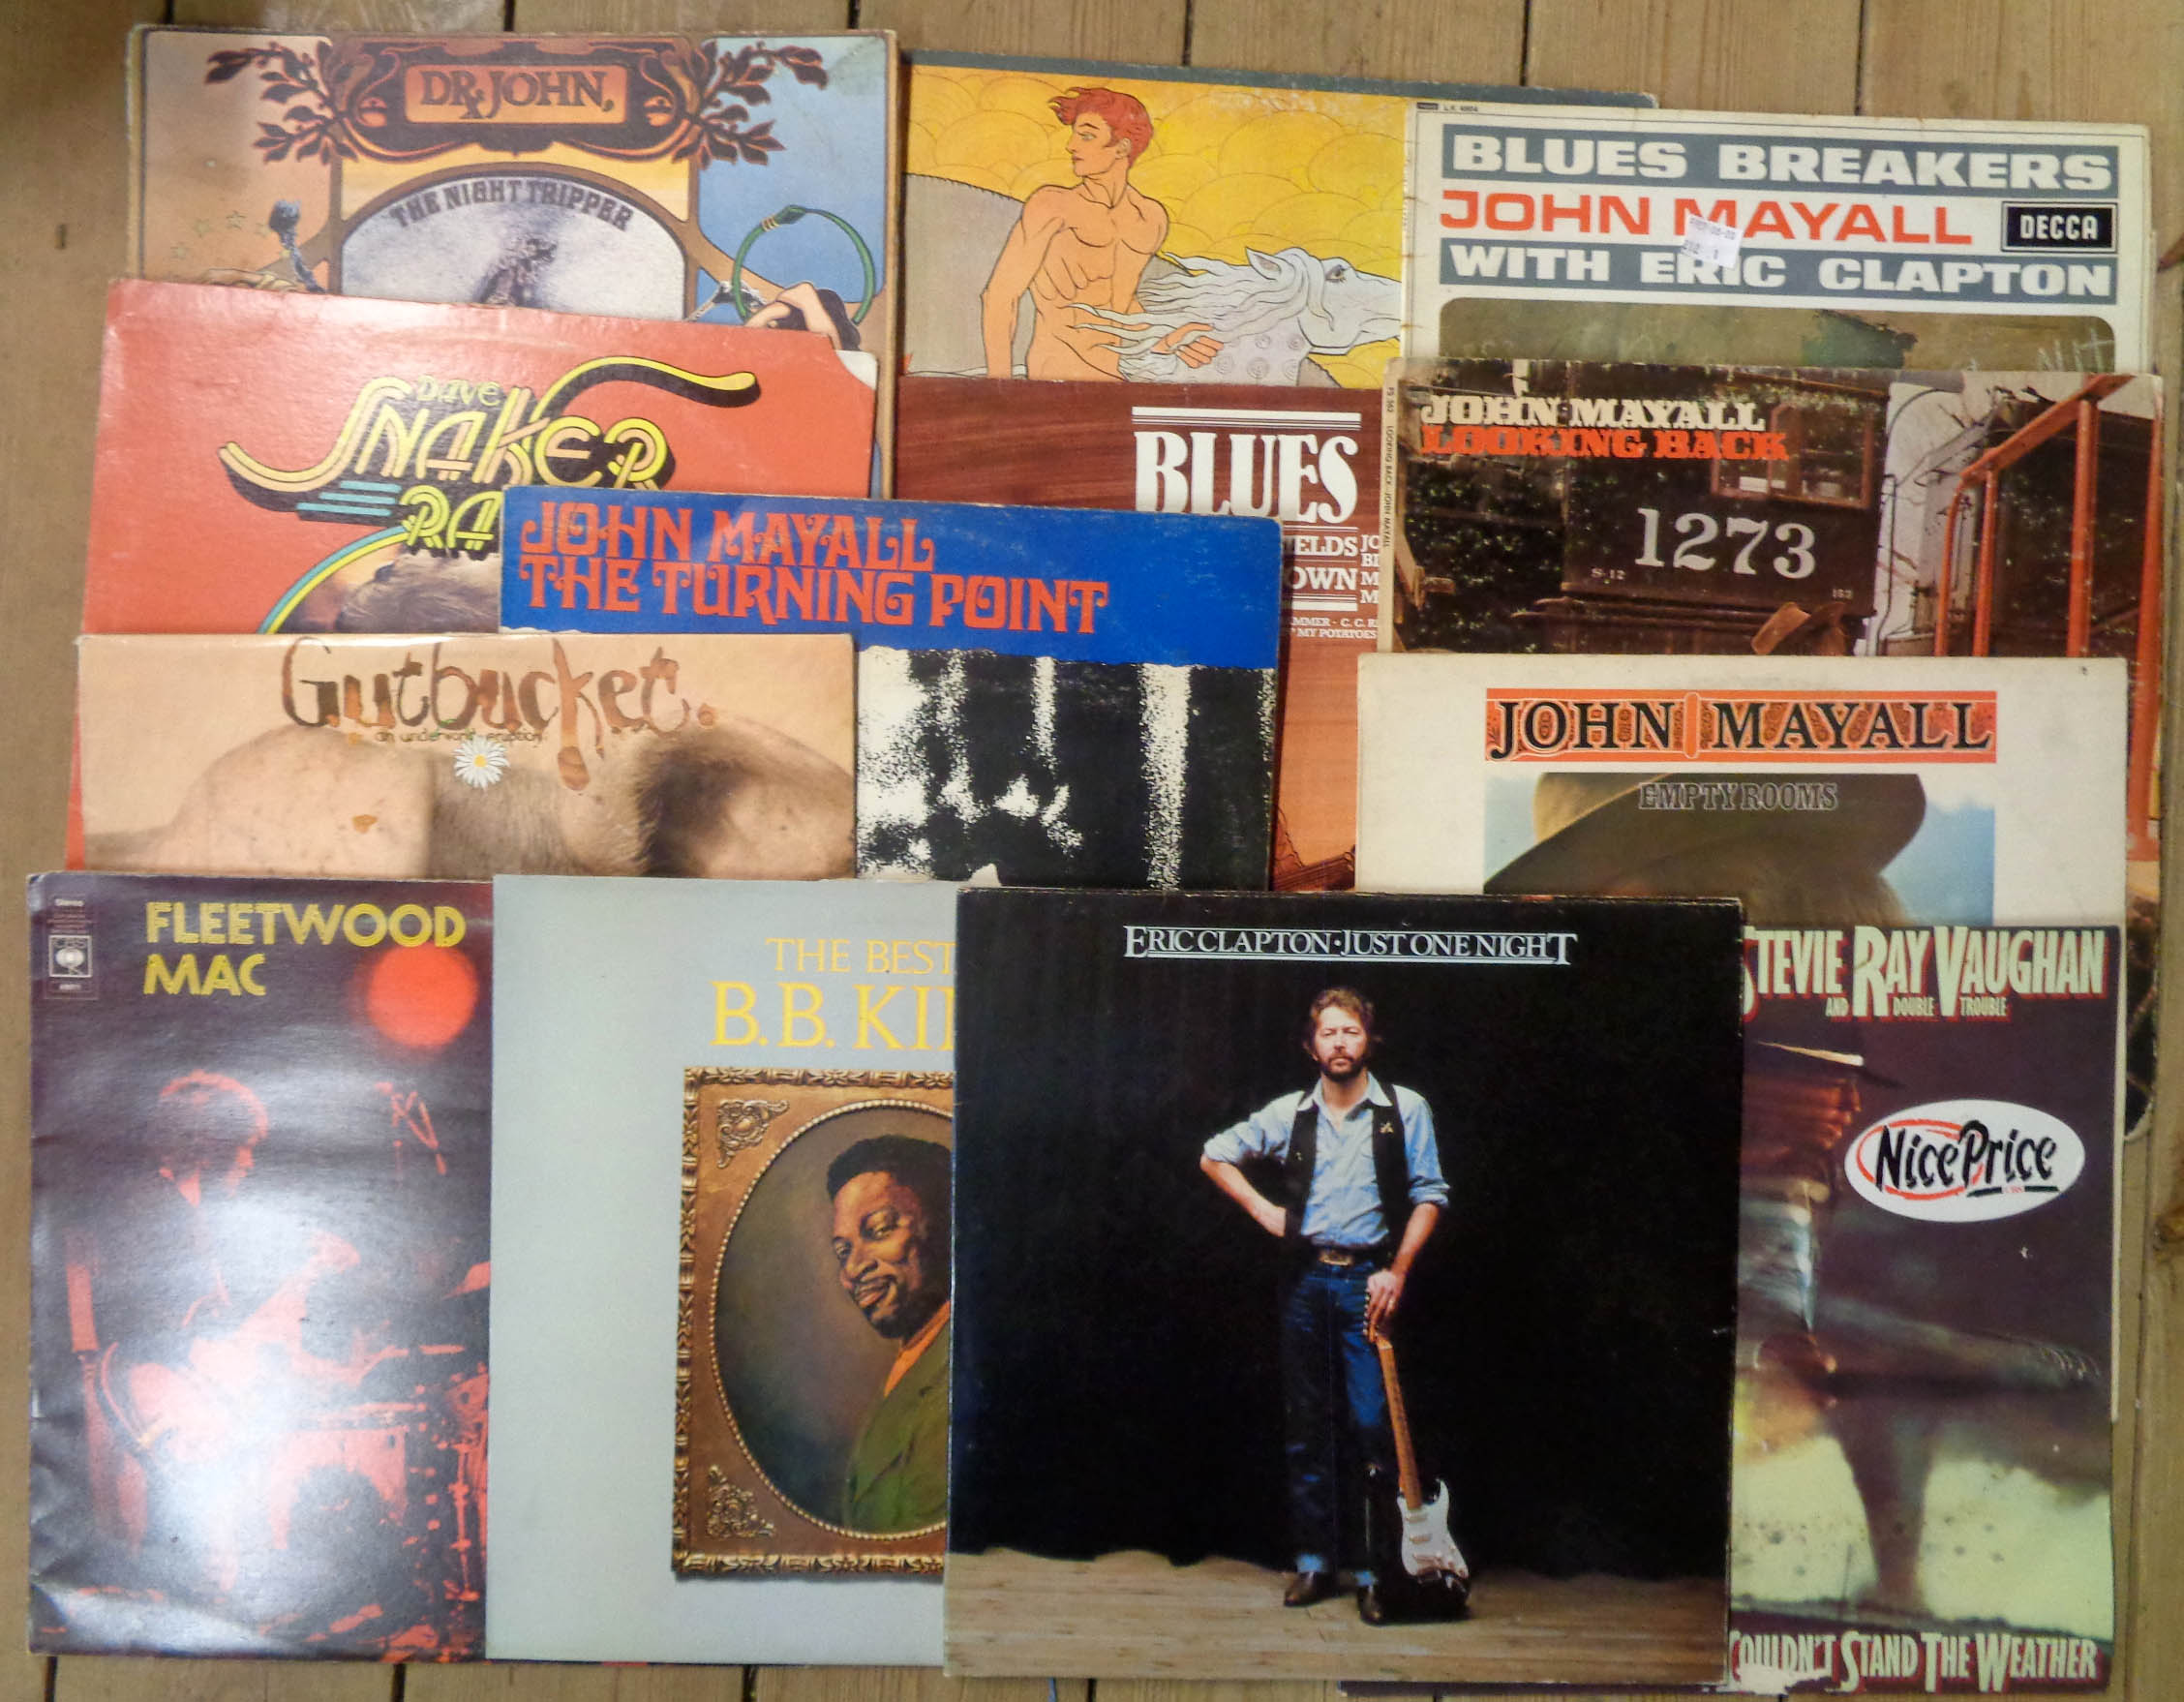 A quantity of blues vinyl LPs including Fleetwood Mac, John Mayall Blues Breakers with Eric Clapton, - Image 2 of 3